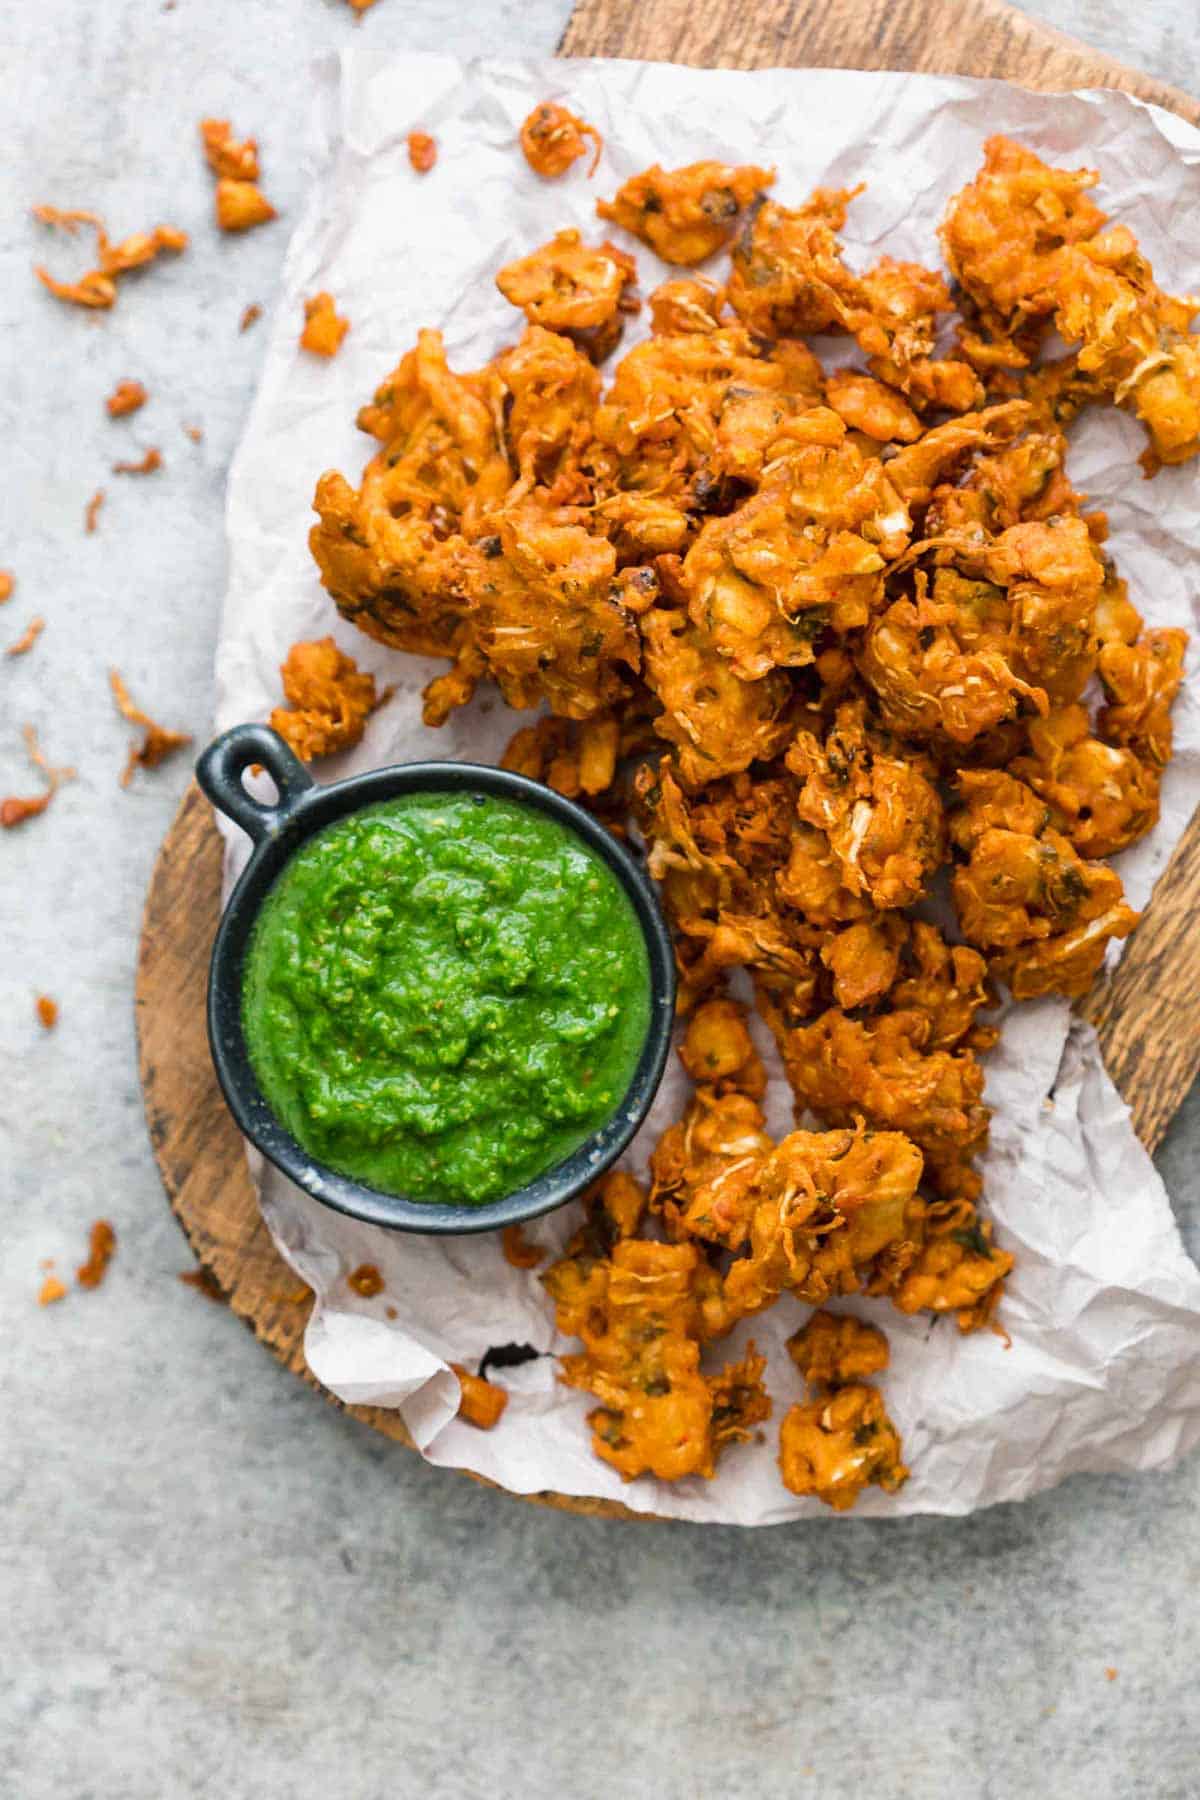 Crunchy vegetable pakoras served on a wooden board with green coriander chutney